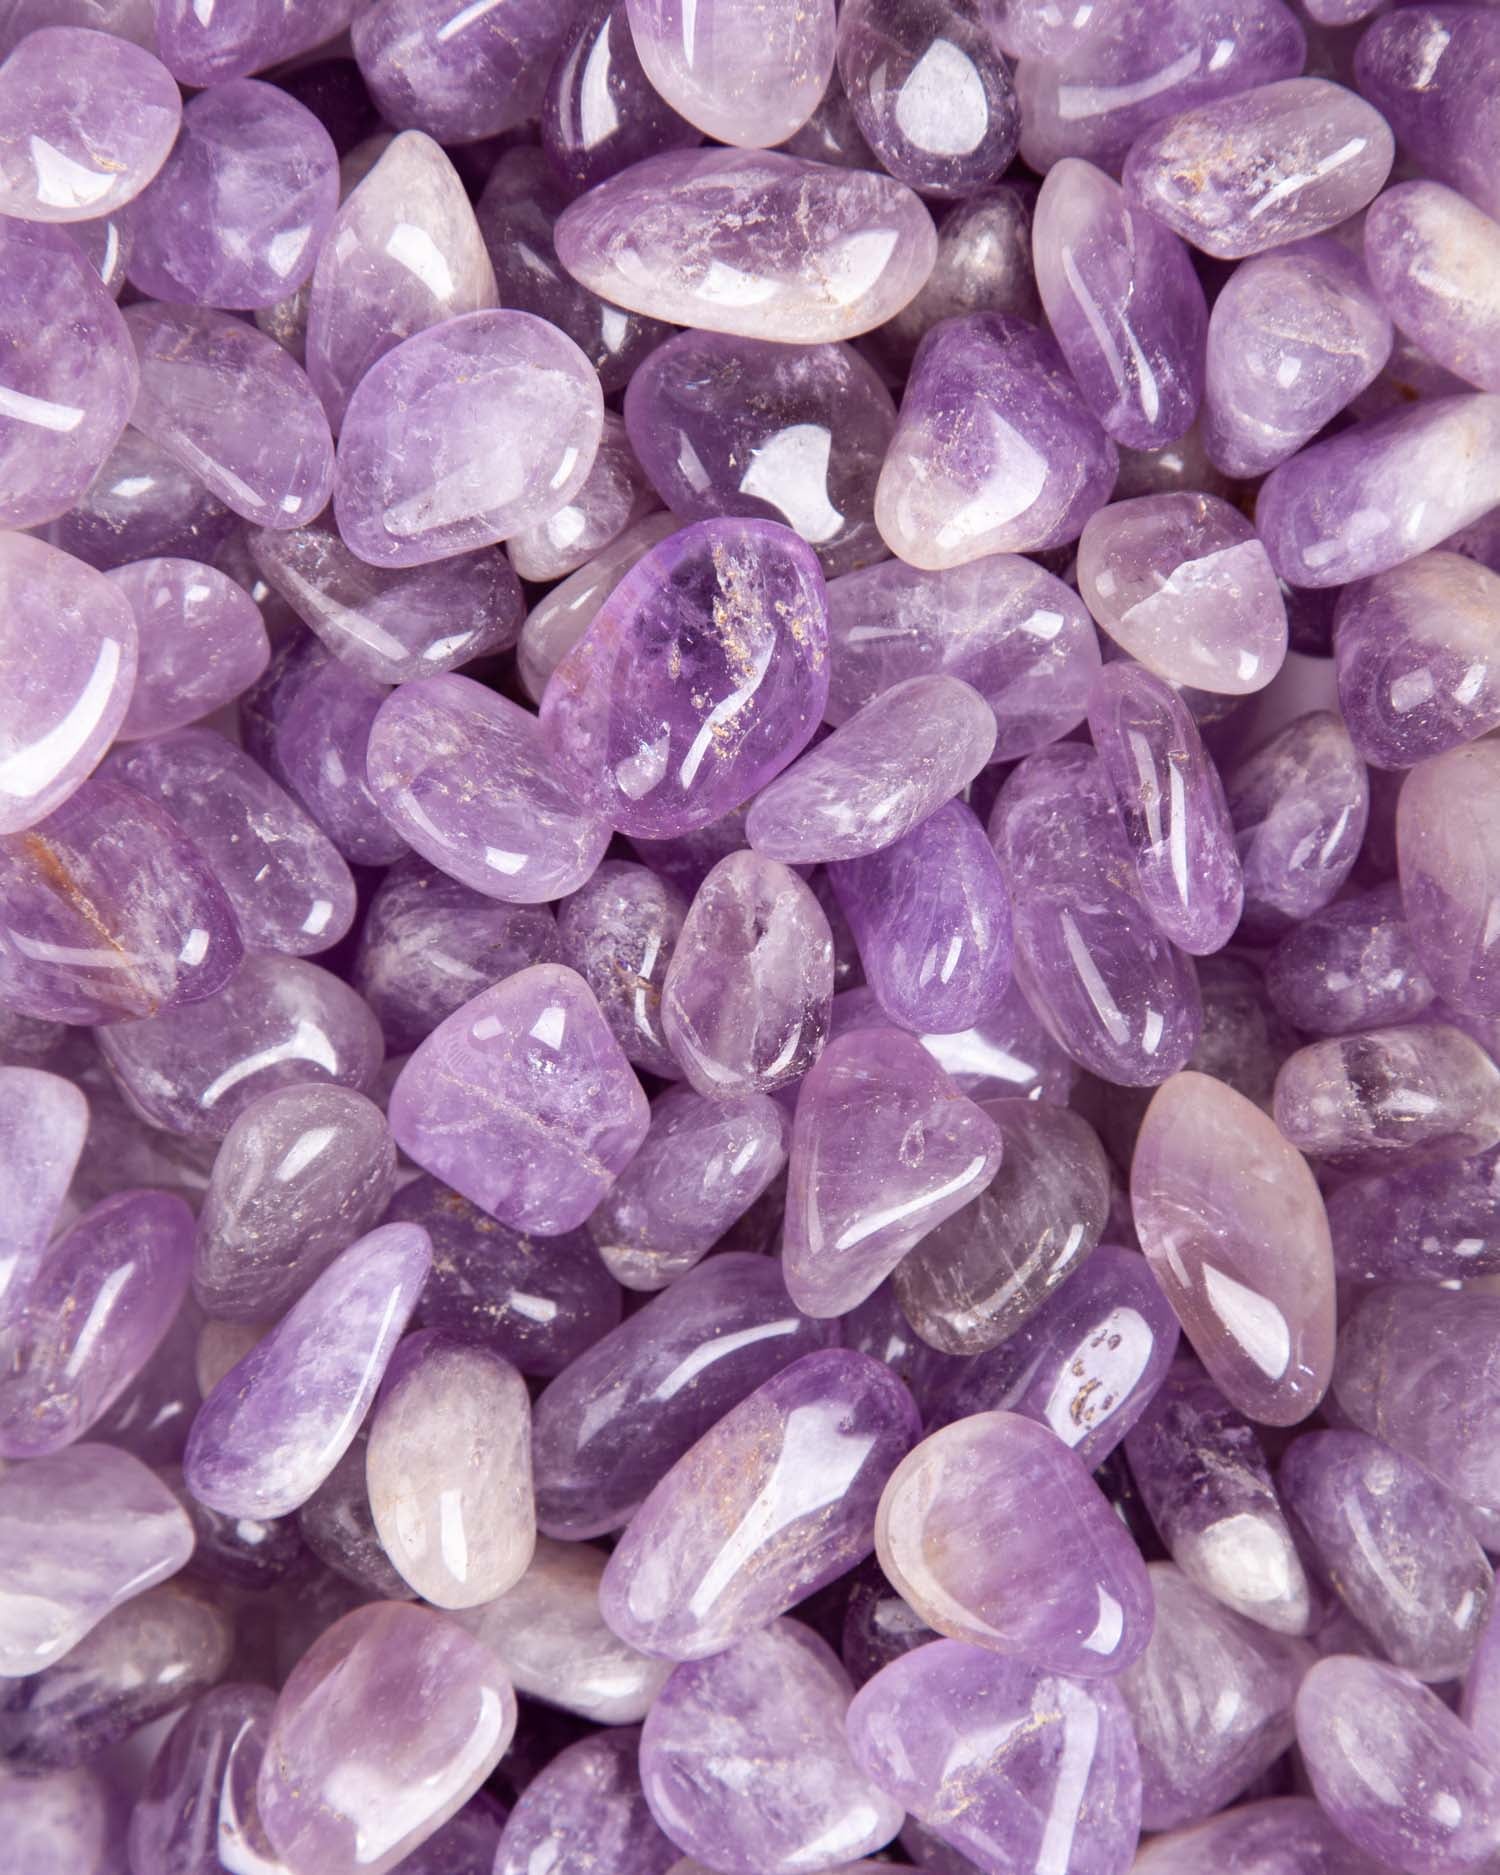 Tumbled Amethyst Brazil - Wholesale Stones, Minerals, Crystals, and